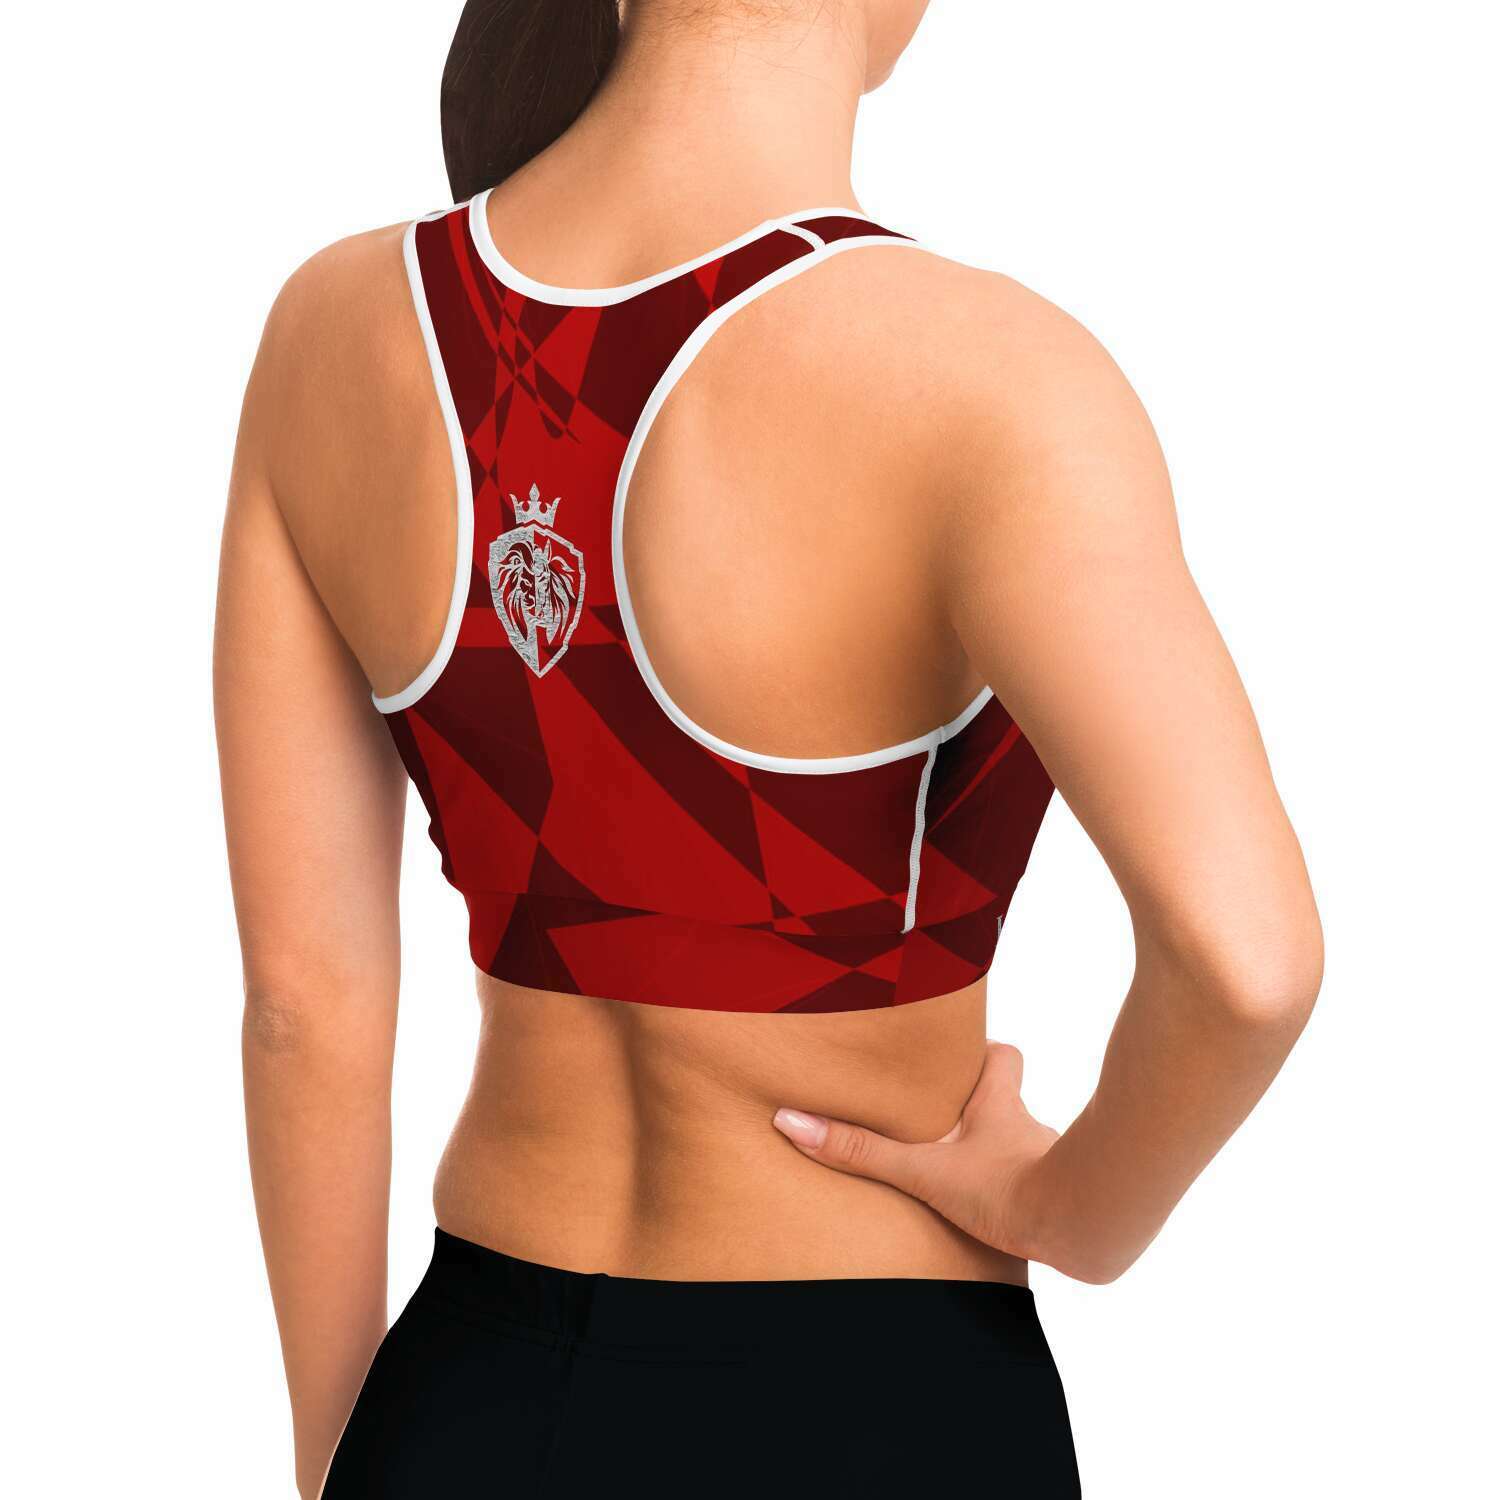 Kingbreed Collection Sports Bra Red Rose